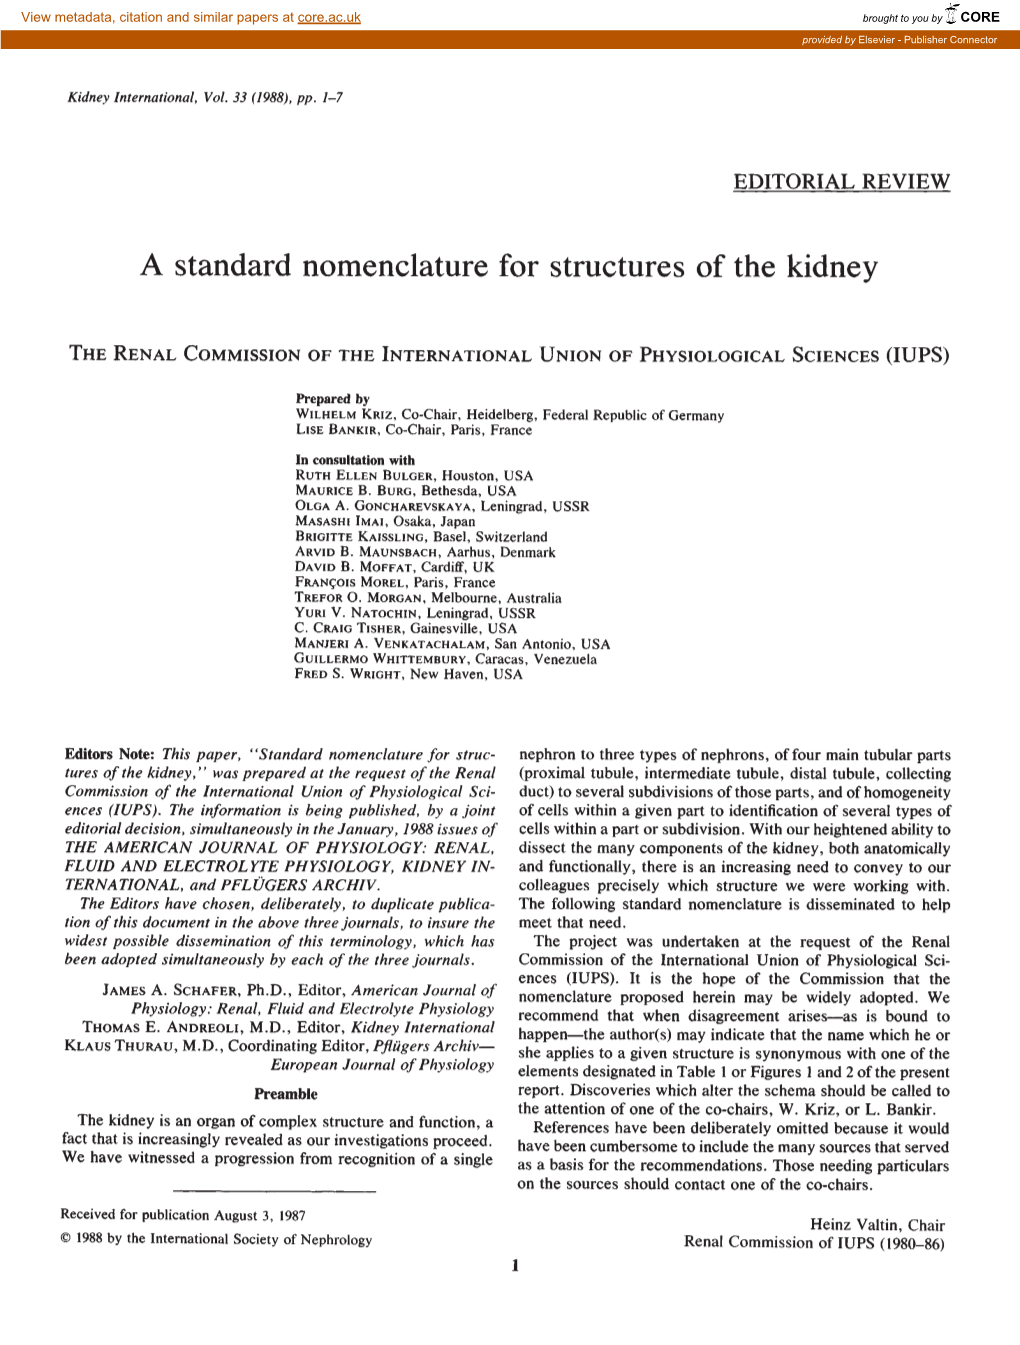 A Standard Nomenclature for Structures of the Kidney